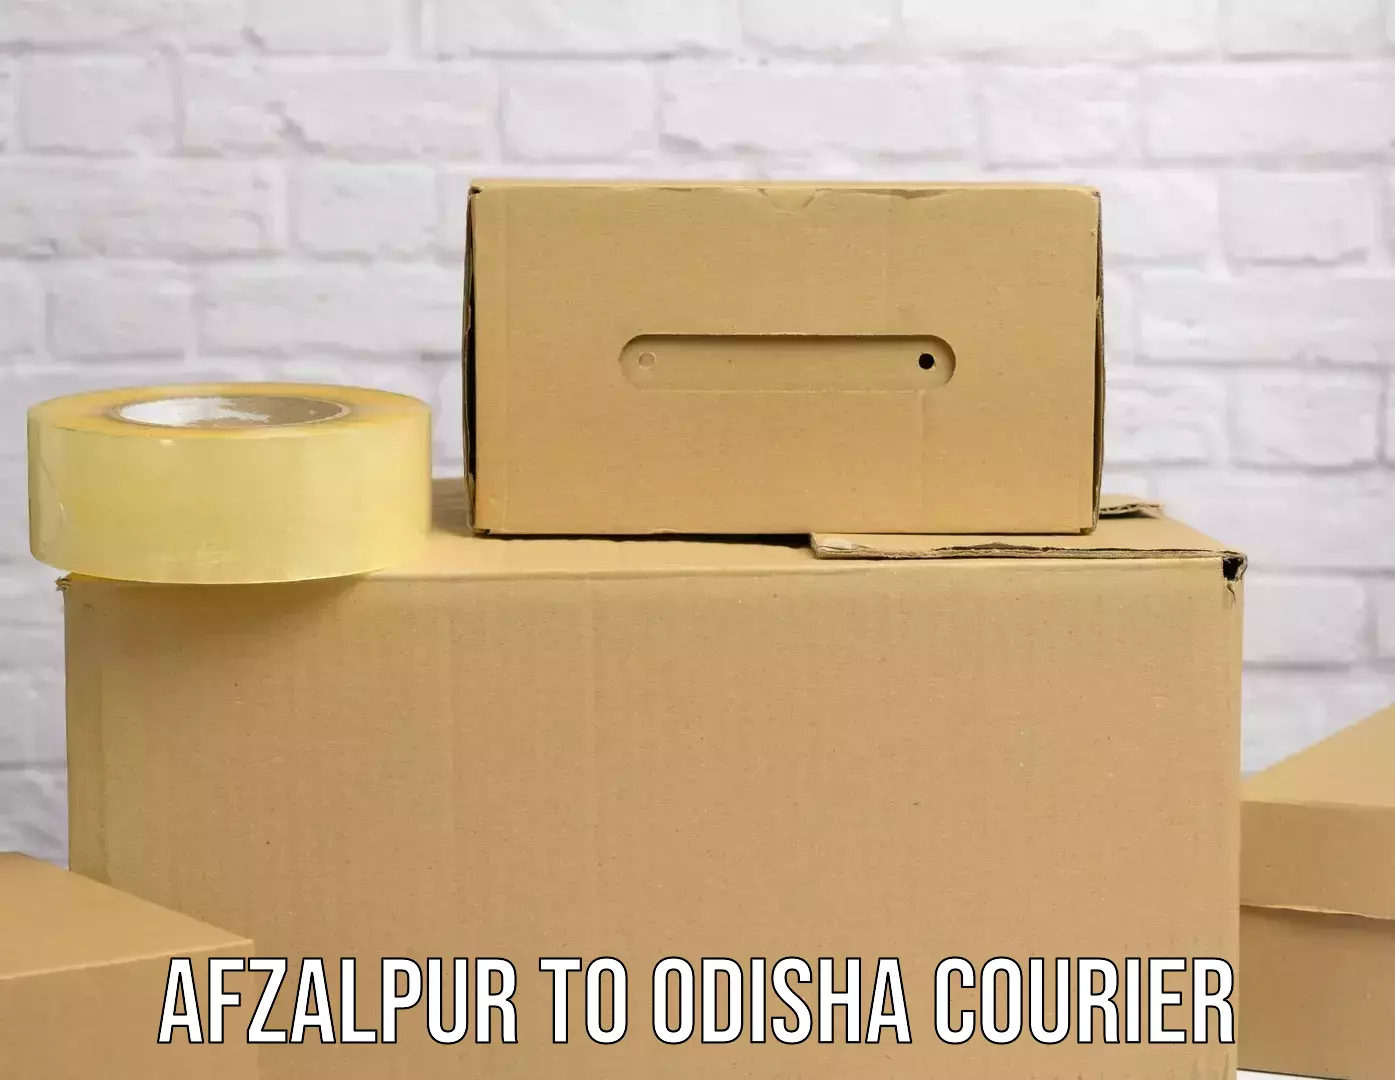 Automated parcel services Afzalpur to Angul